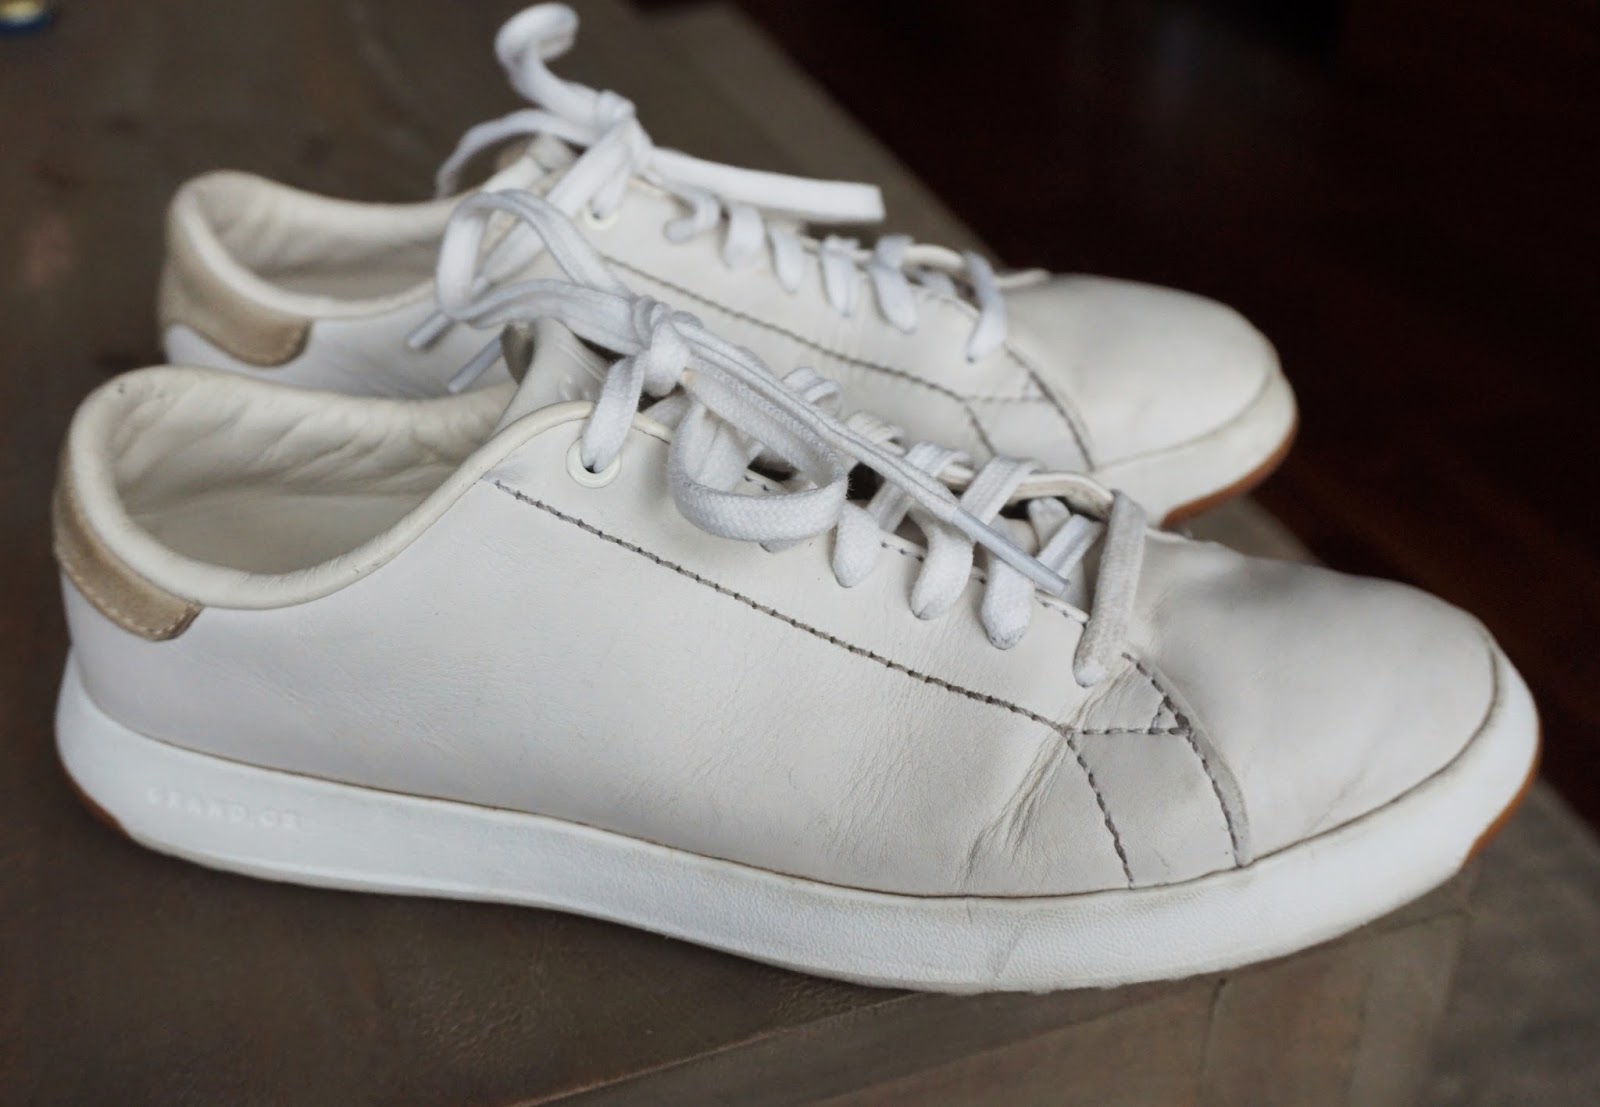 How To Clean Cole Haan Grand Os Shoes? - Shoe Effect